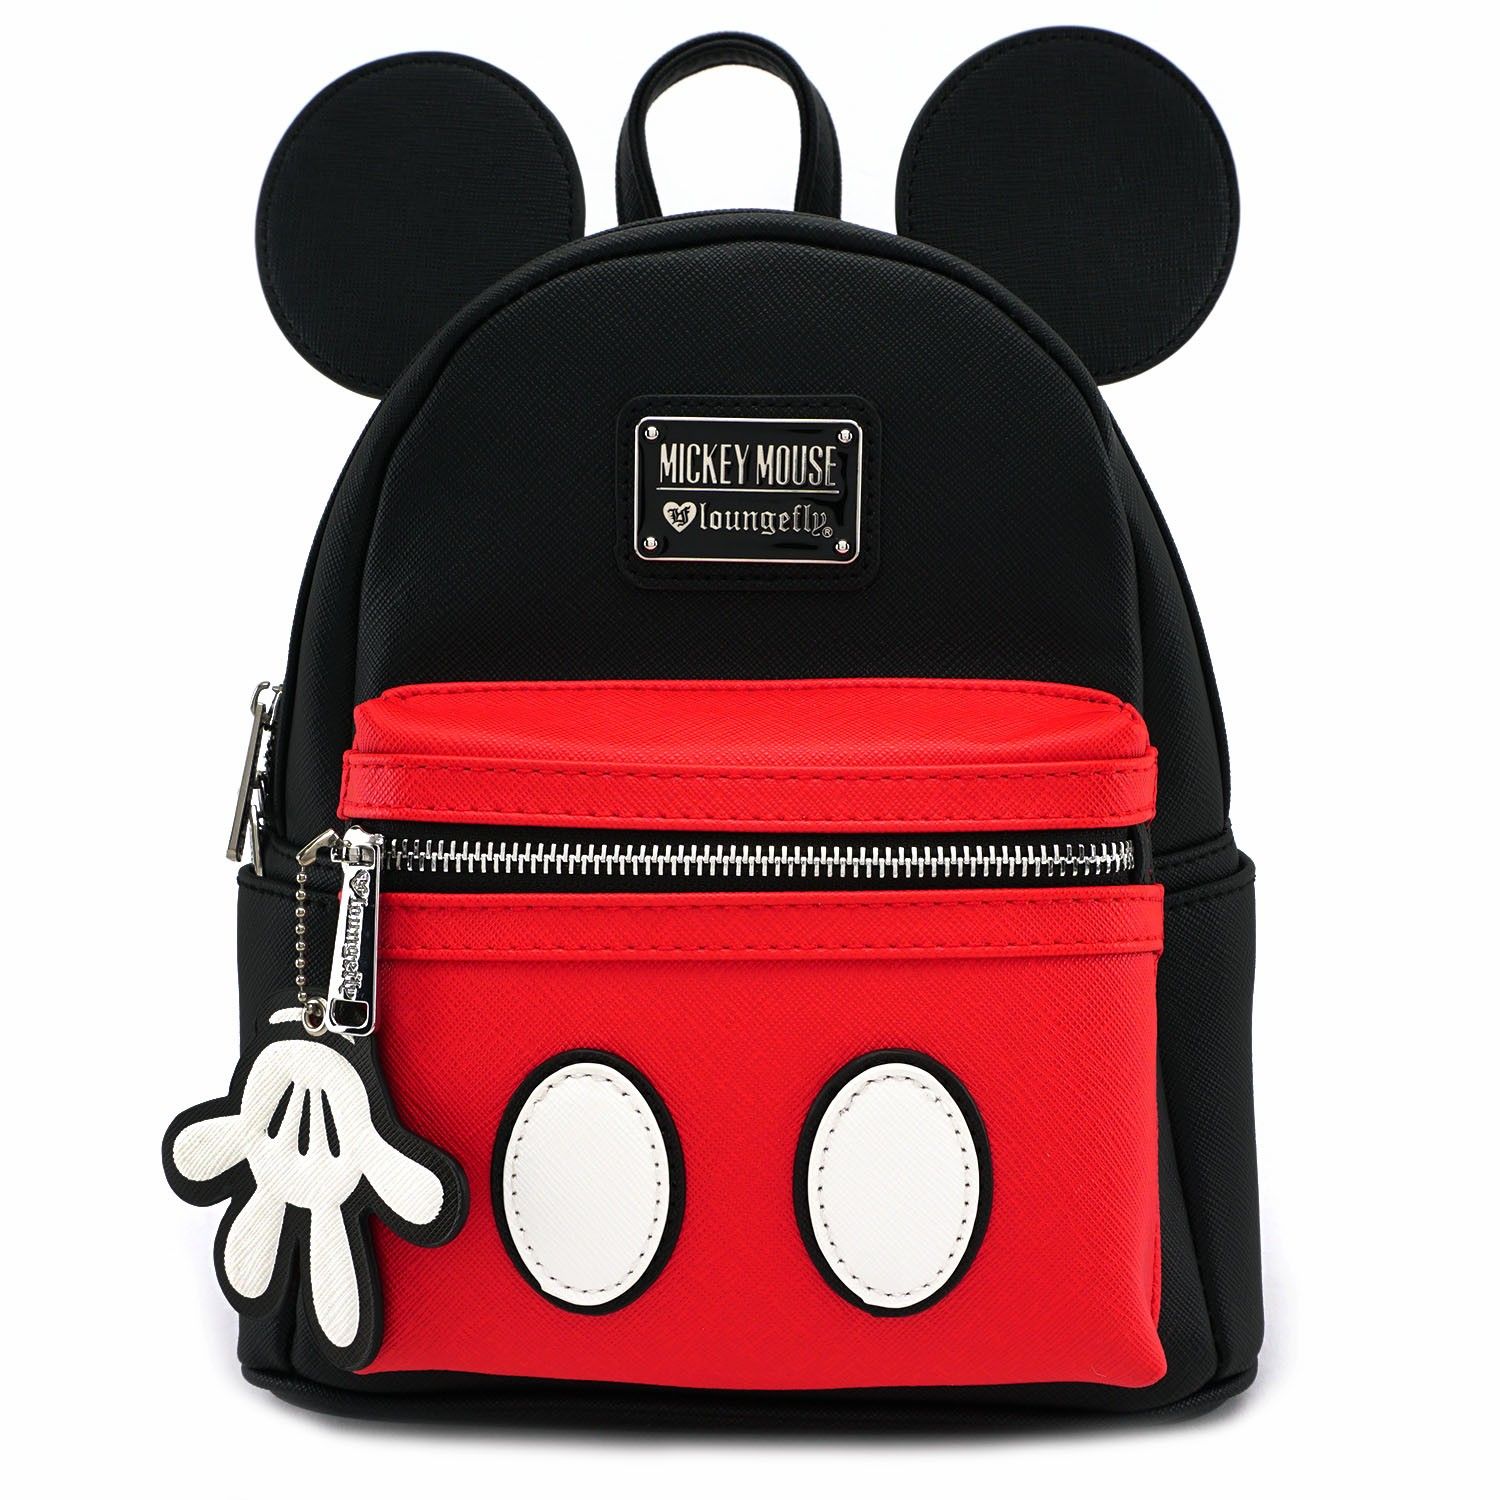 Loungefly Mickey Mouse Satchels for Women | Mercari